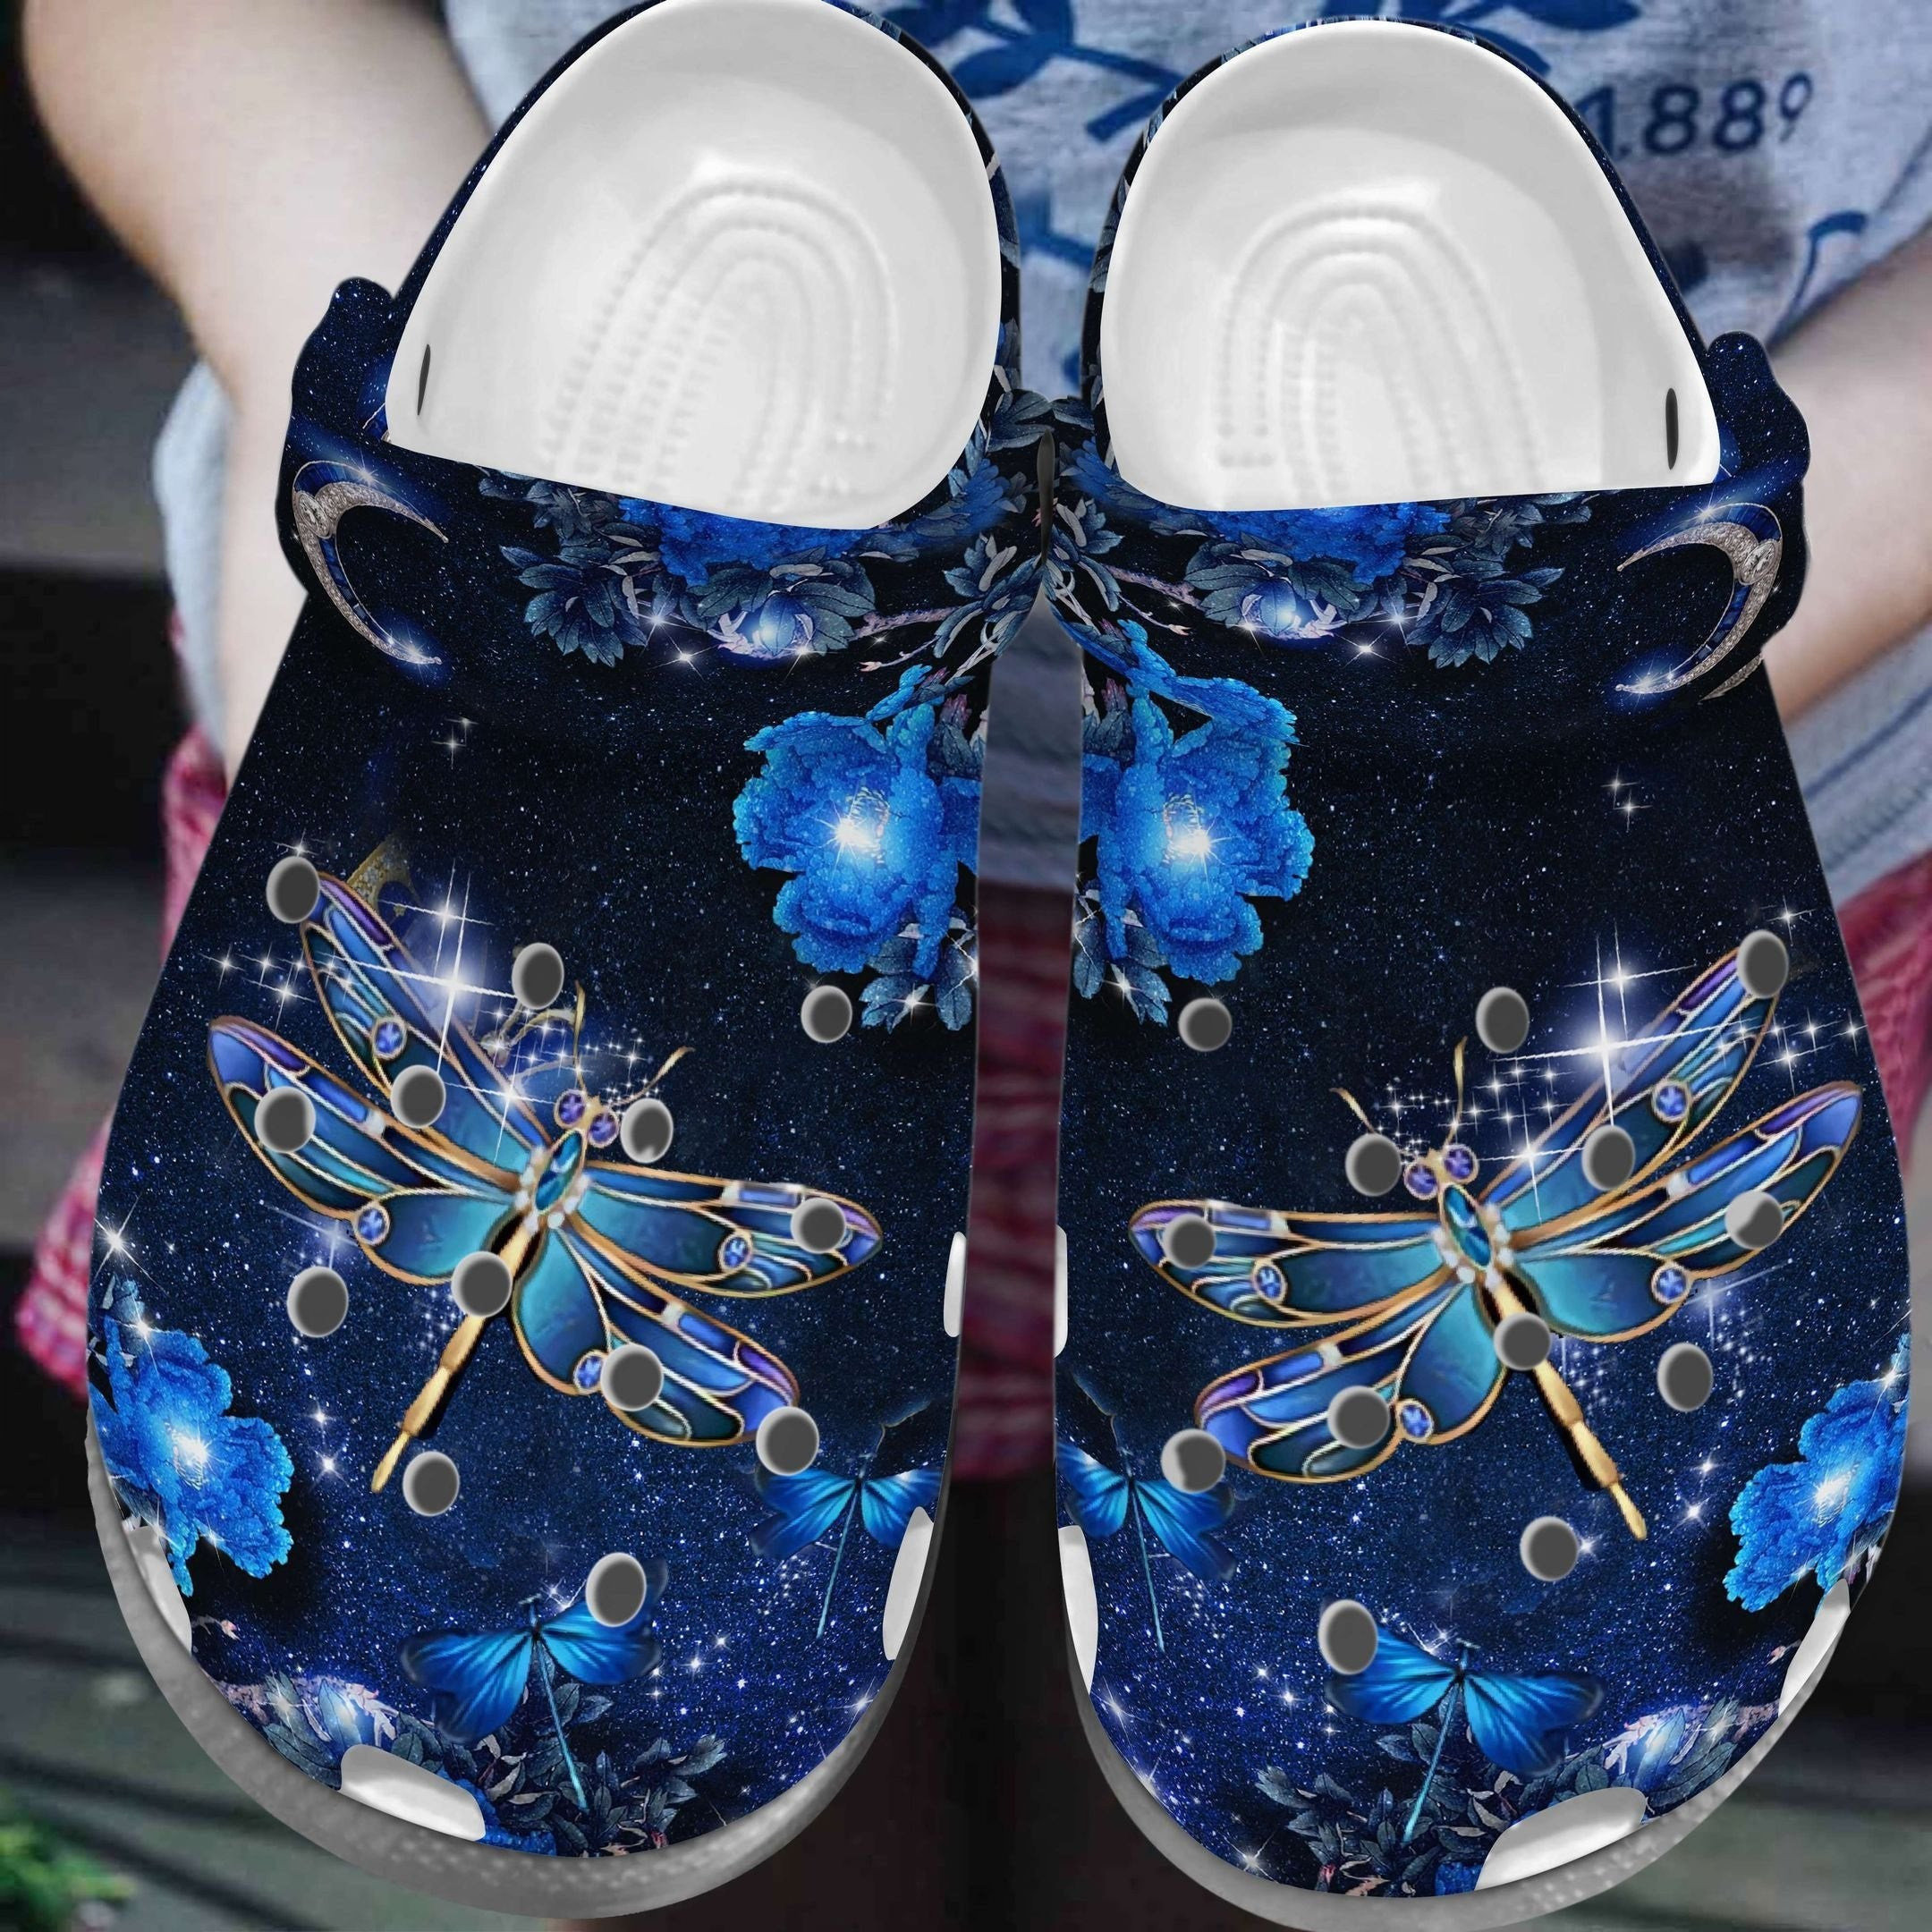 Blue Dragonfly Twinkle Crocs Shoes - Dragonfly Flower Blue Croc Clogs Shoes Gift Birthday Girl